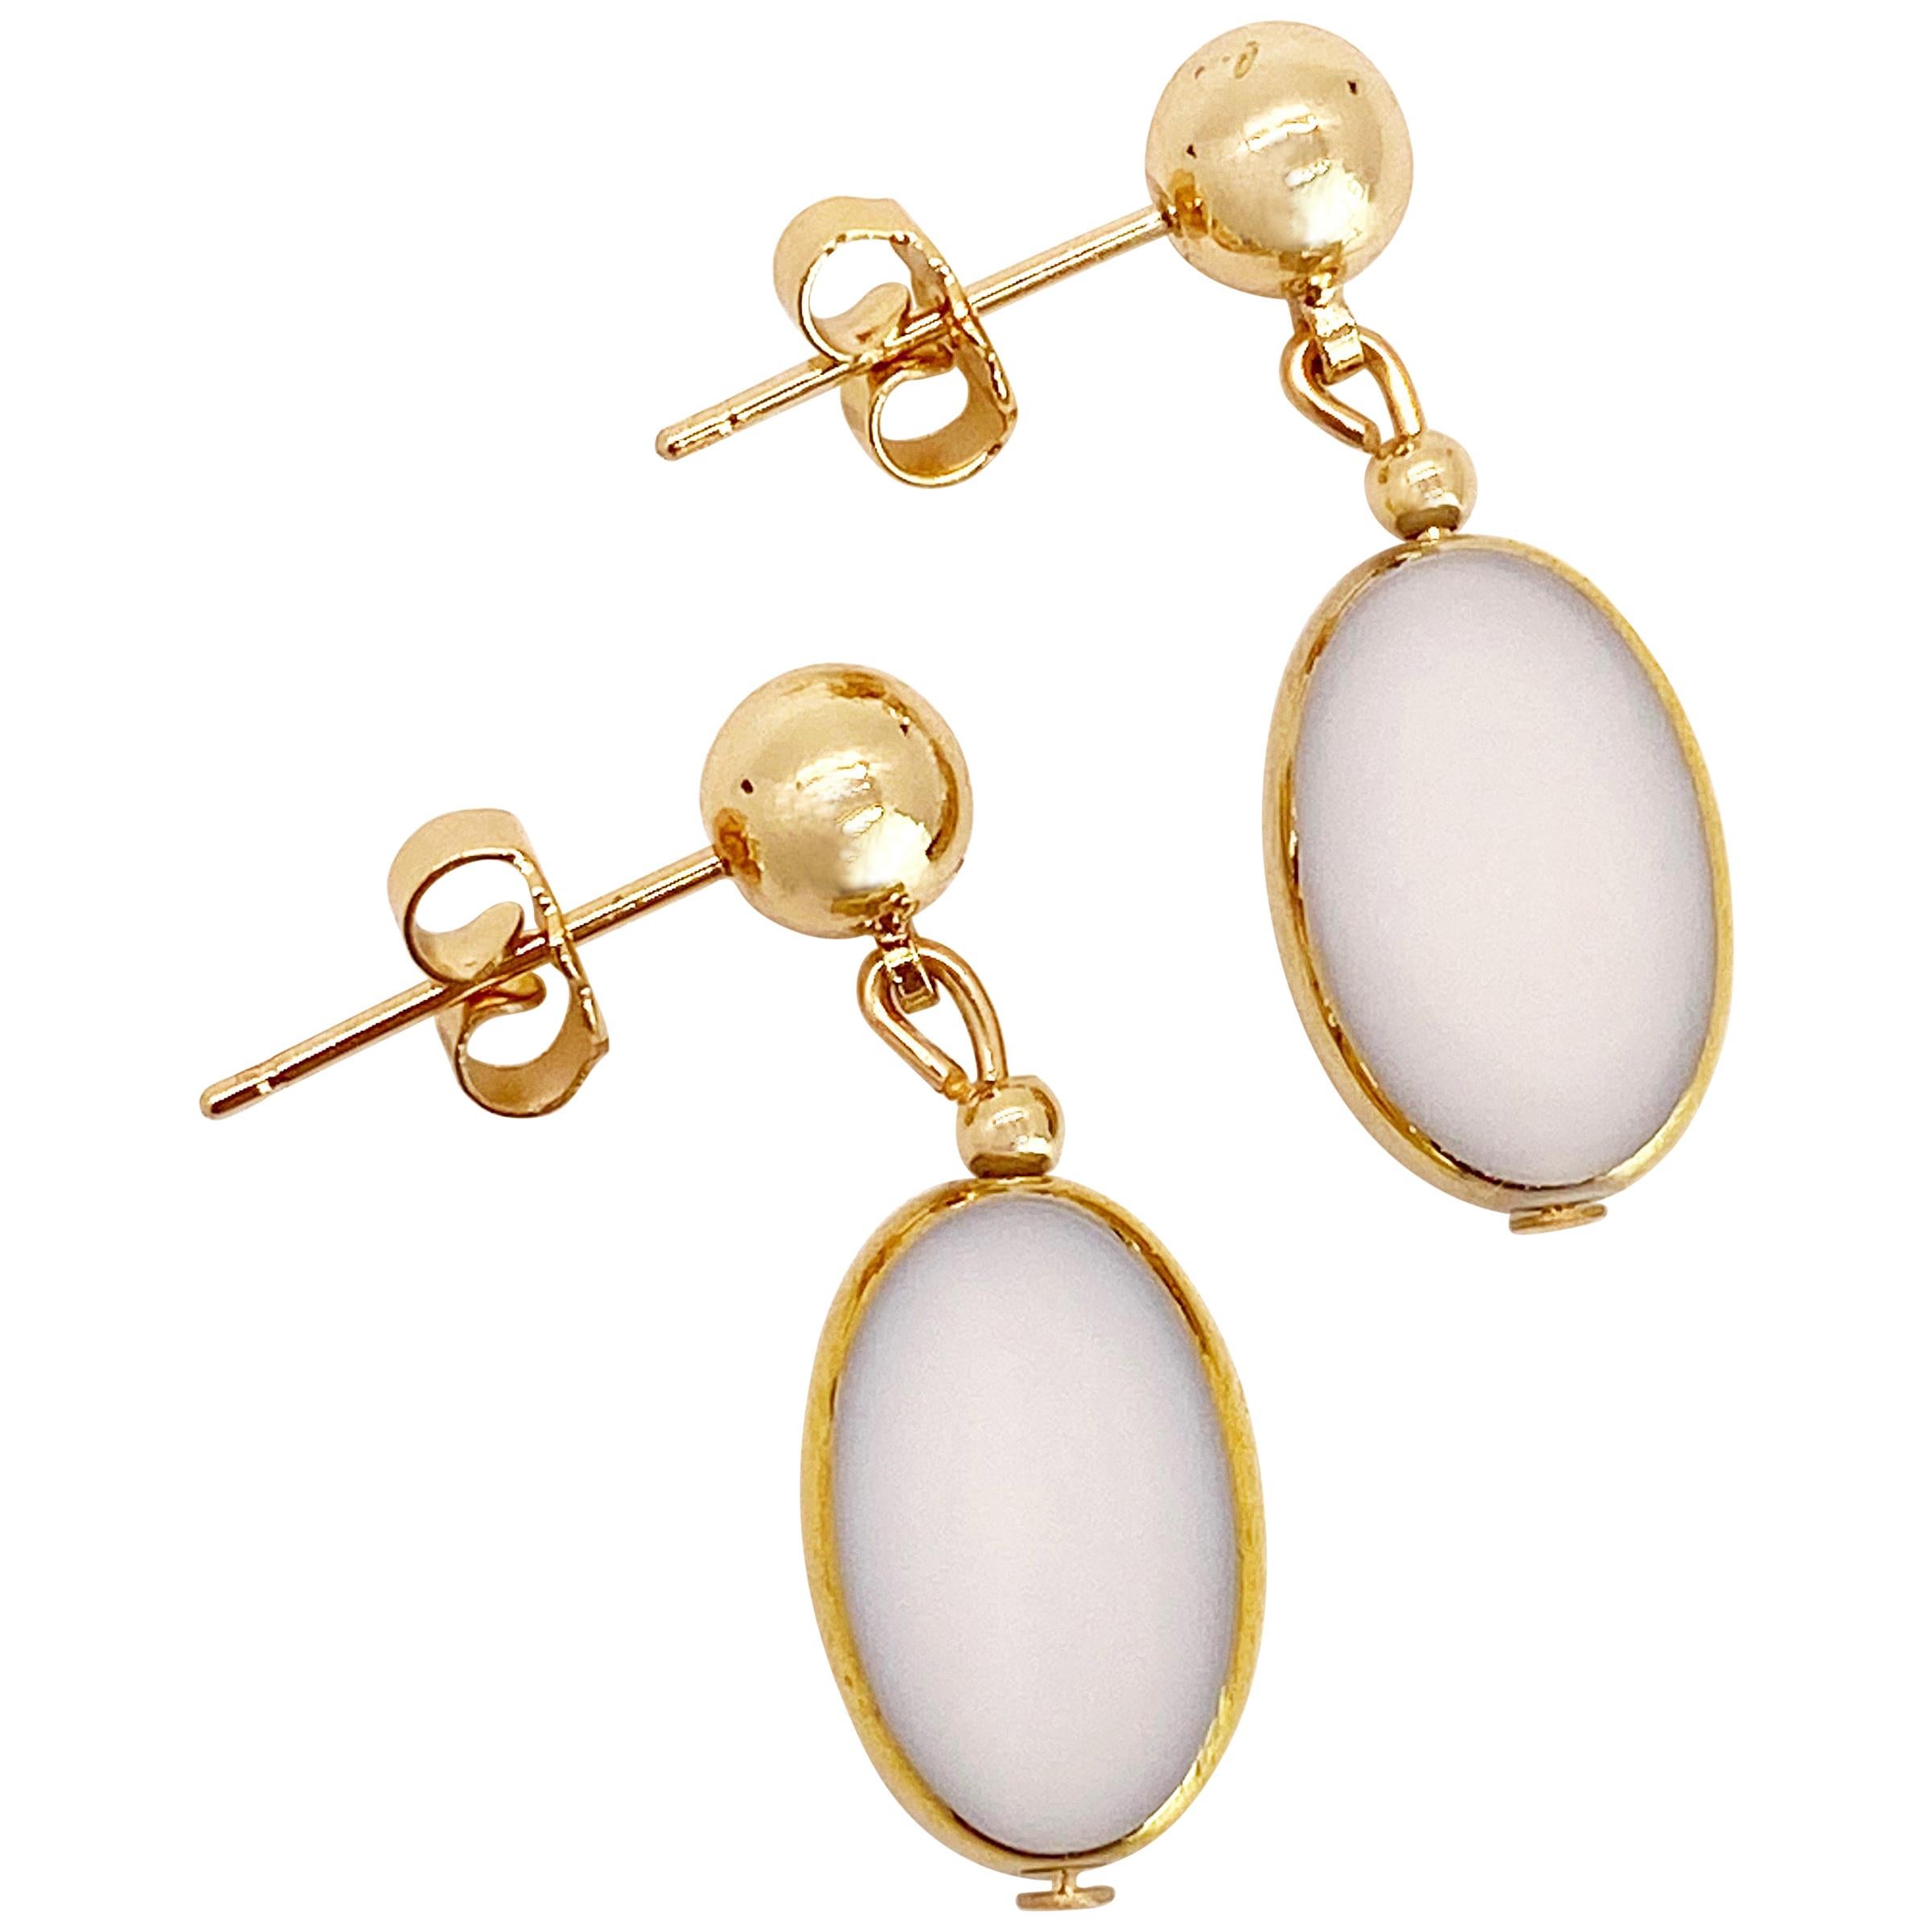 White Oval Vintage German Glass Beads edged with 24K gold Earrings